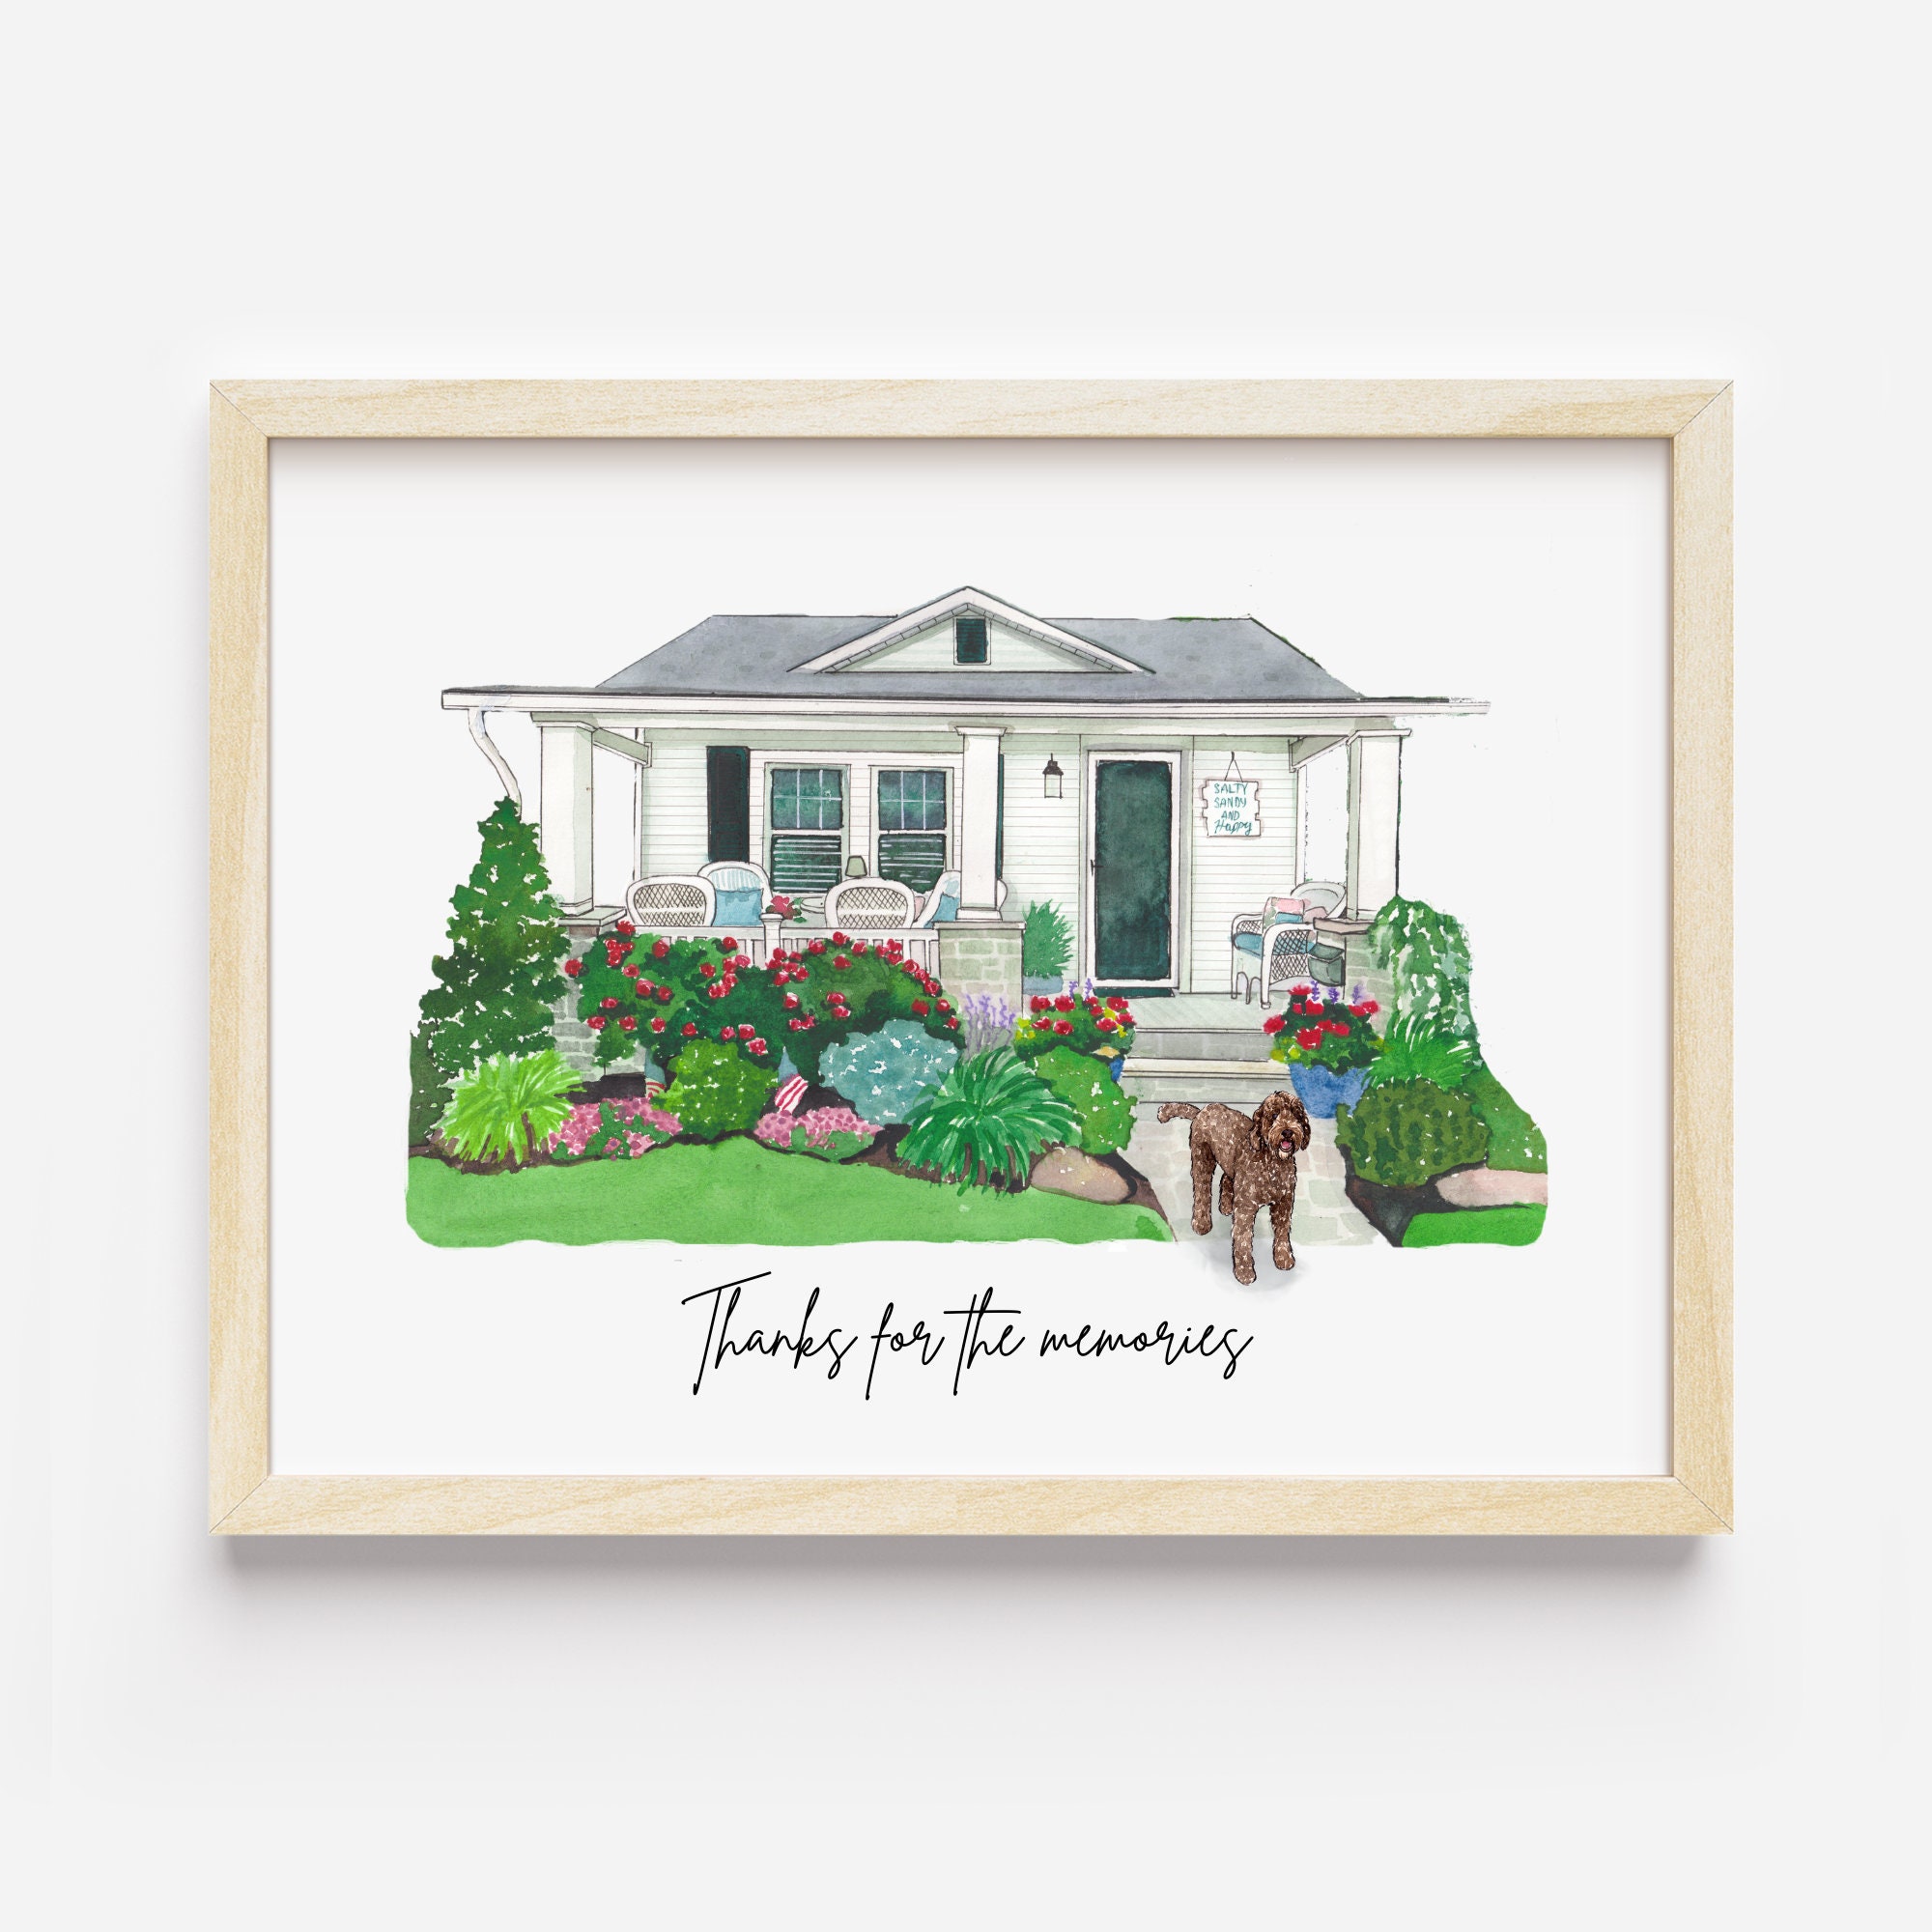 Custom Watercolor House Painting Printhouse Painting From image